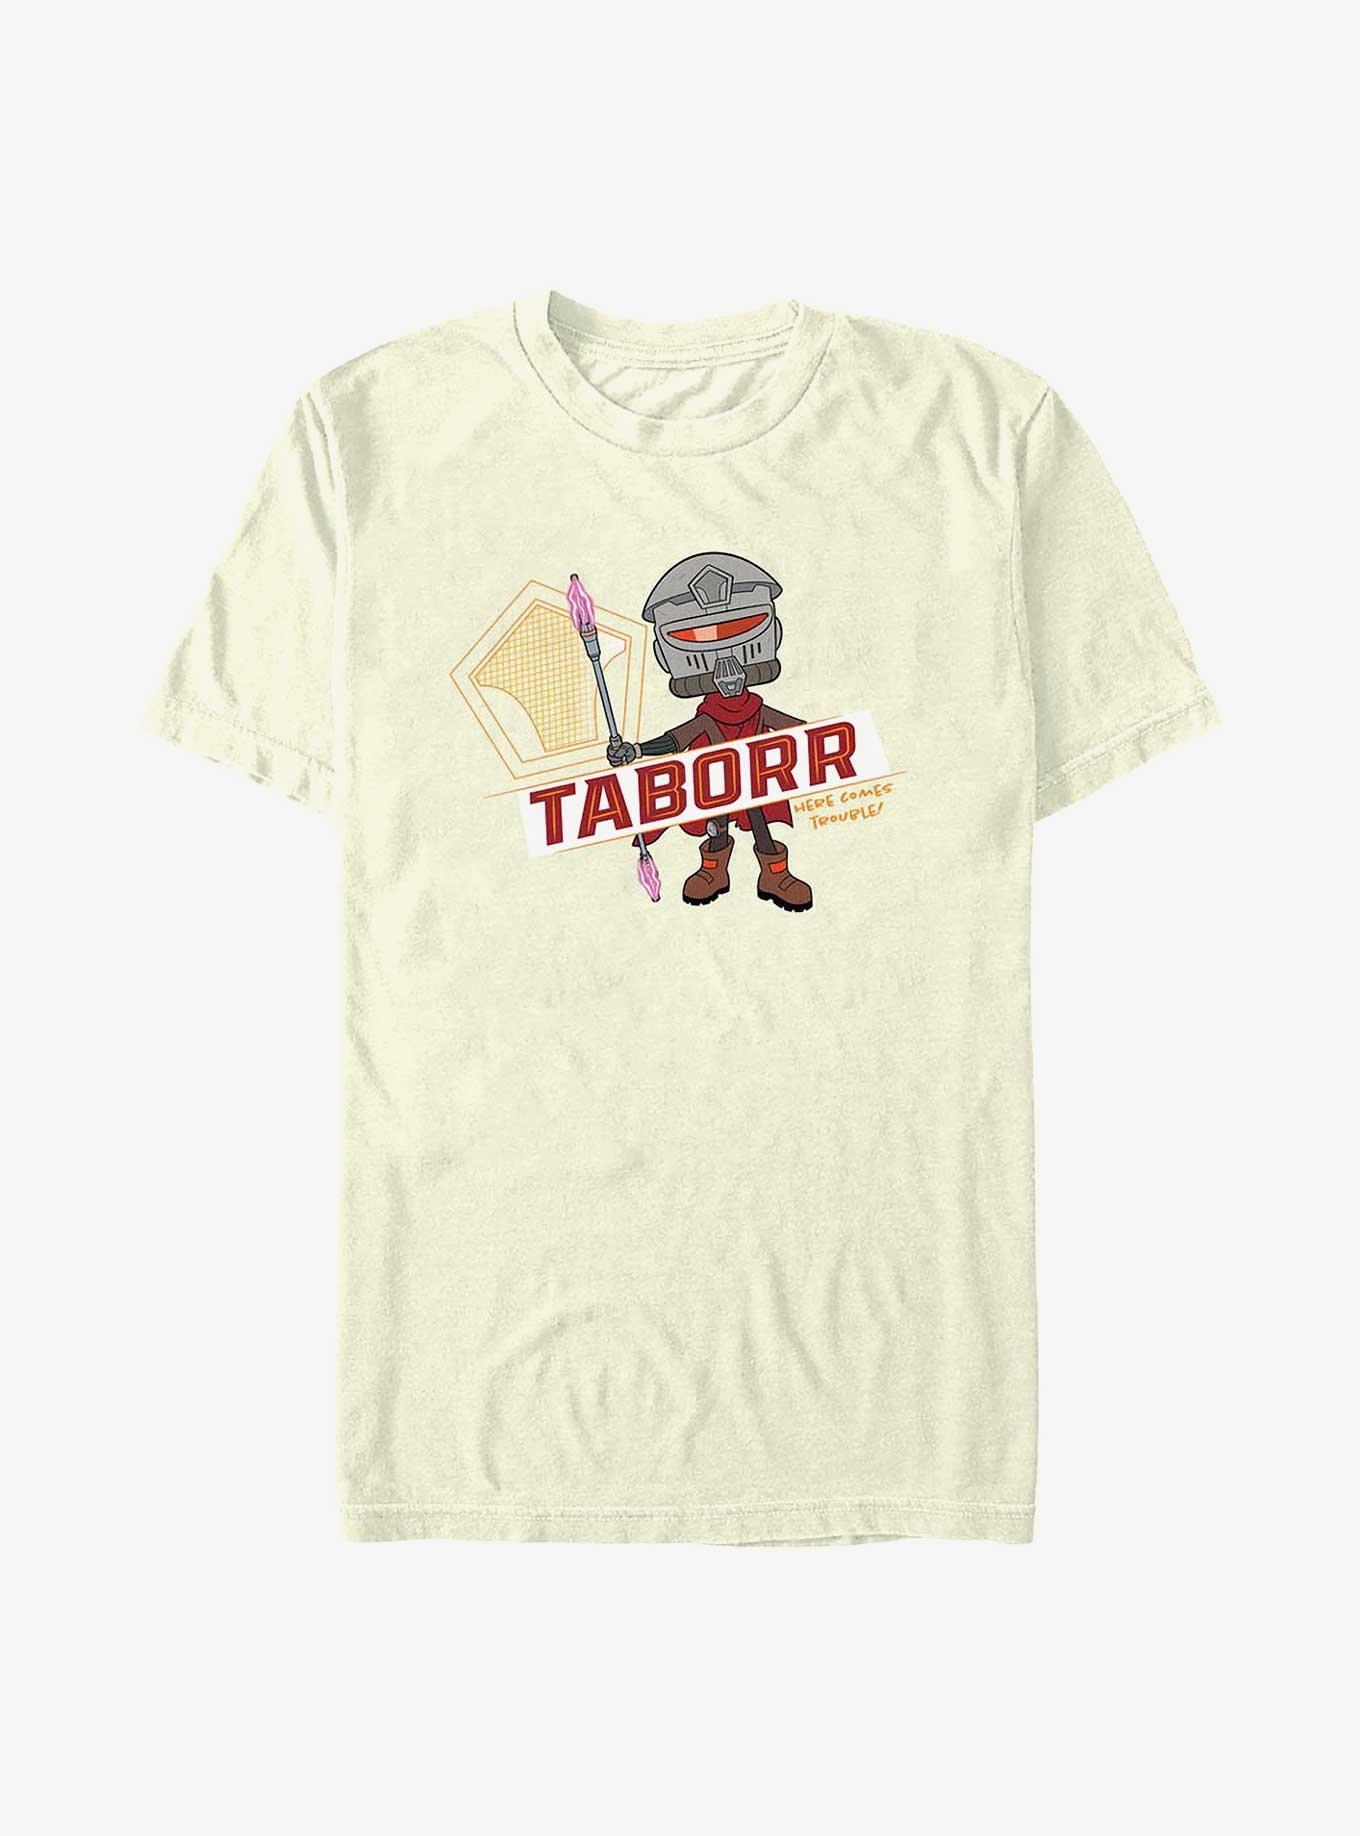 Star Wars: Young Jedi Adventures Taborr Here Comes Trouble T-Shirt